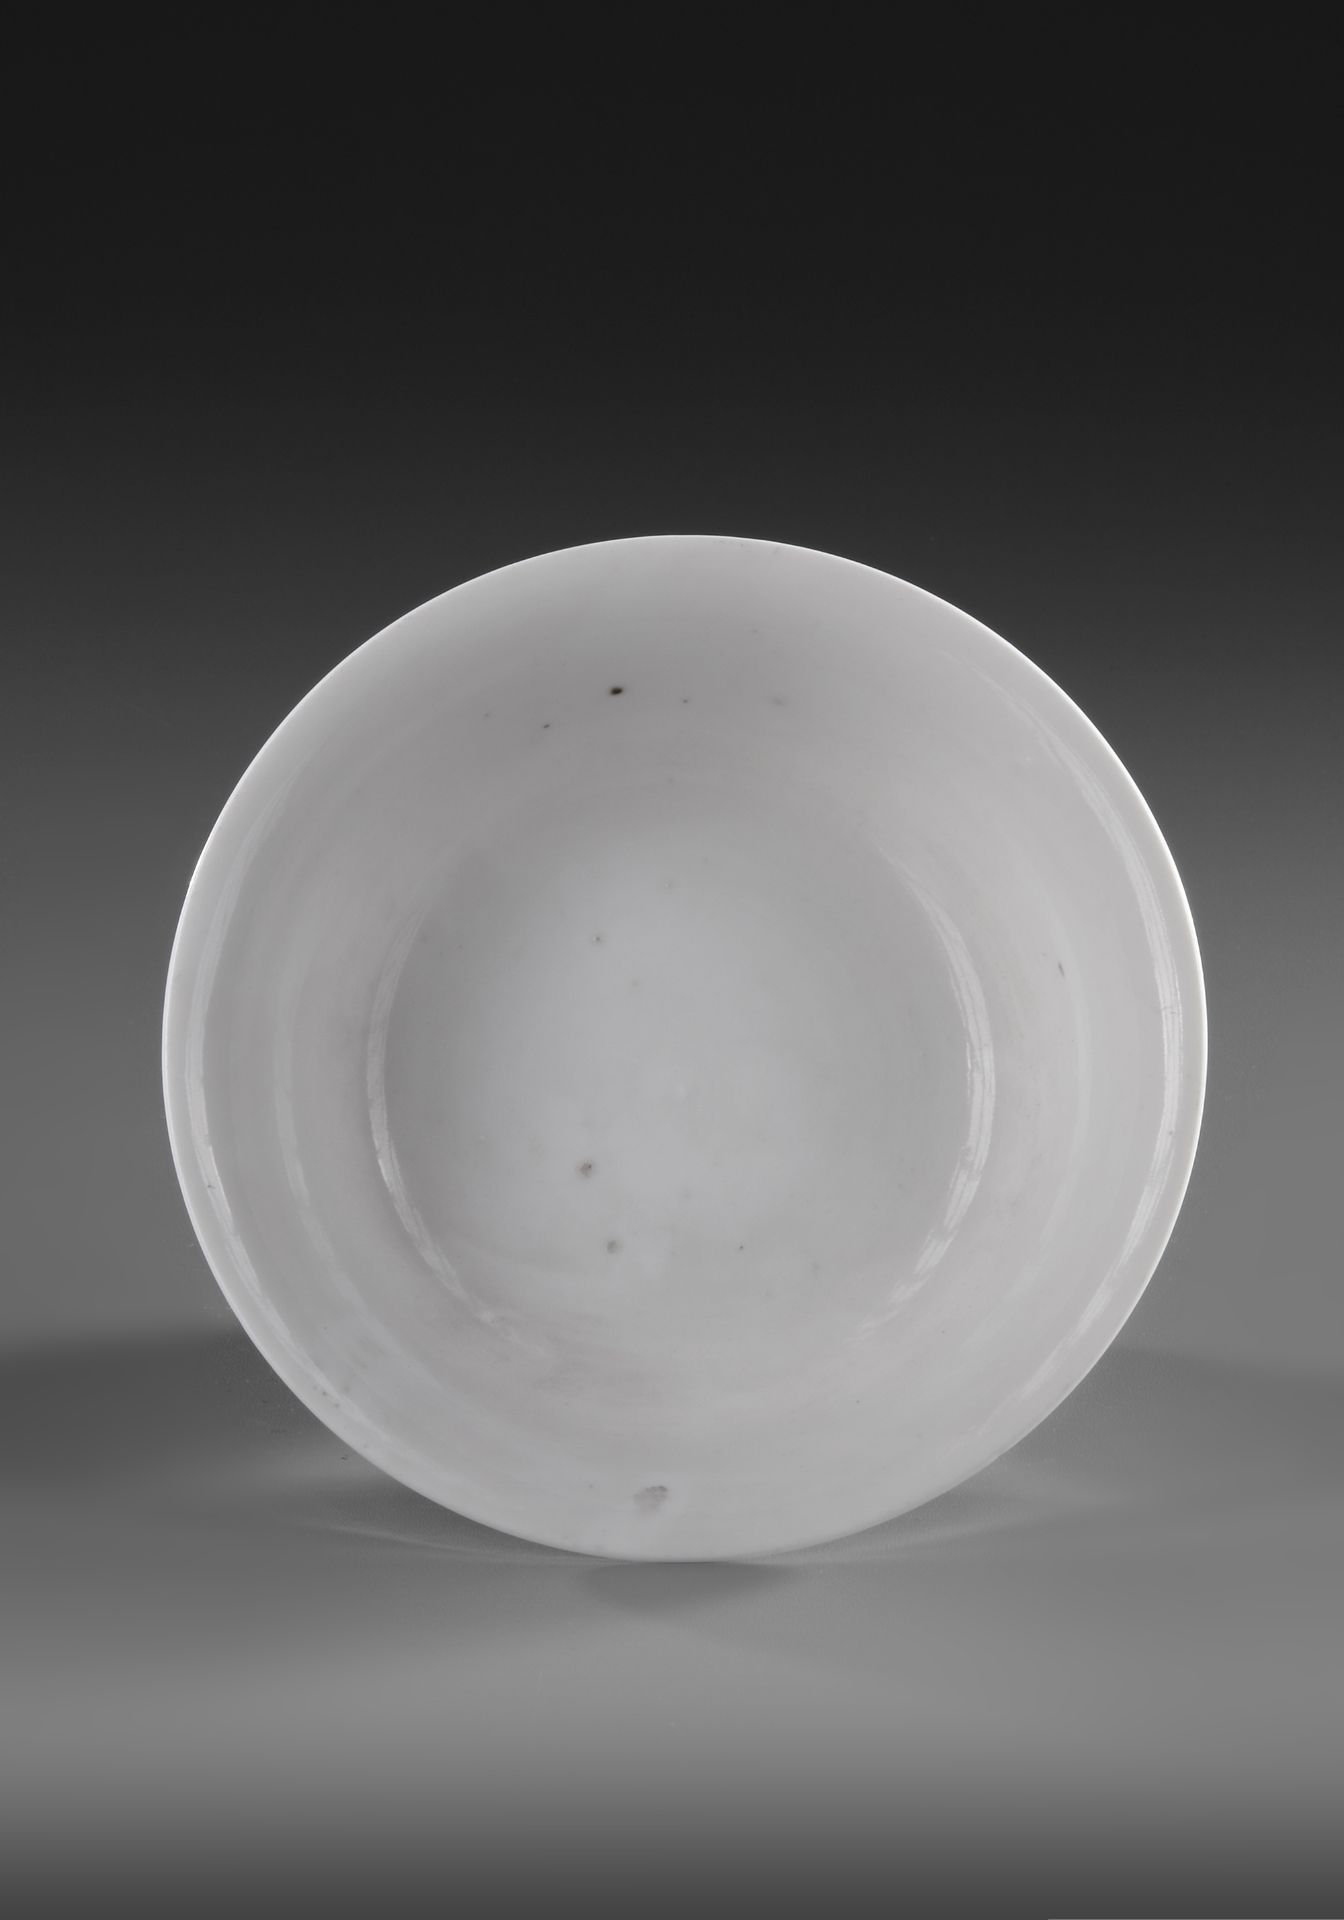 A CHINESE BLANC DE CHINE STEM BOWL, LATE MING DYNASTY (17TH CENTURY) - Image 3 of 4